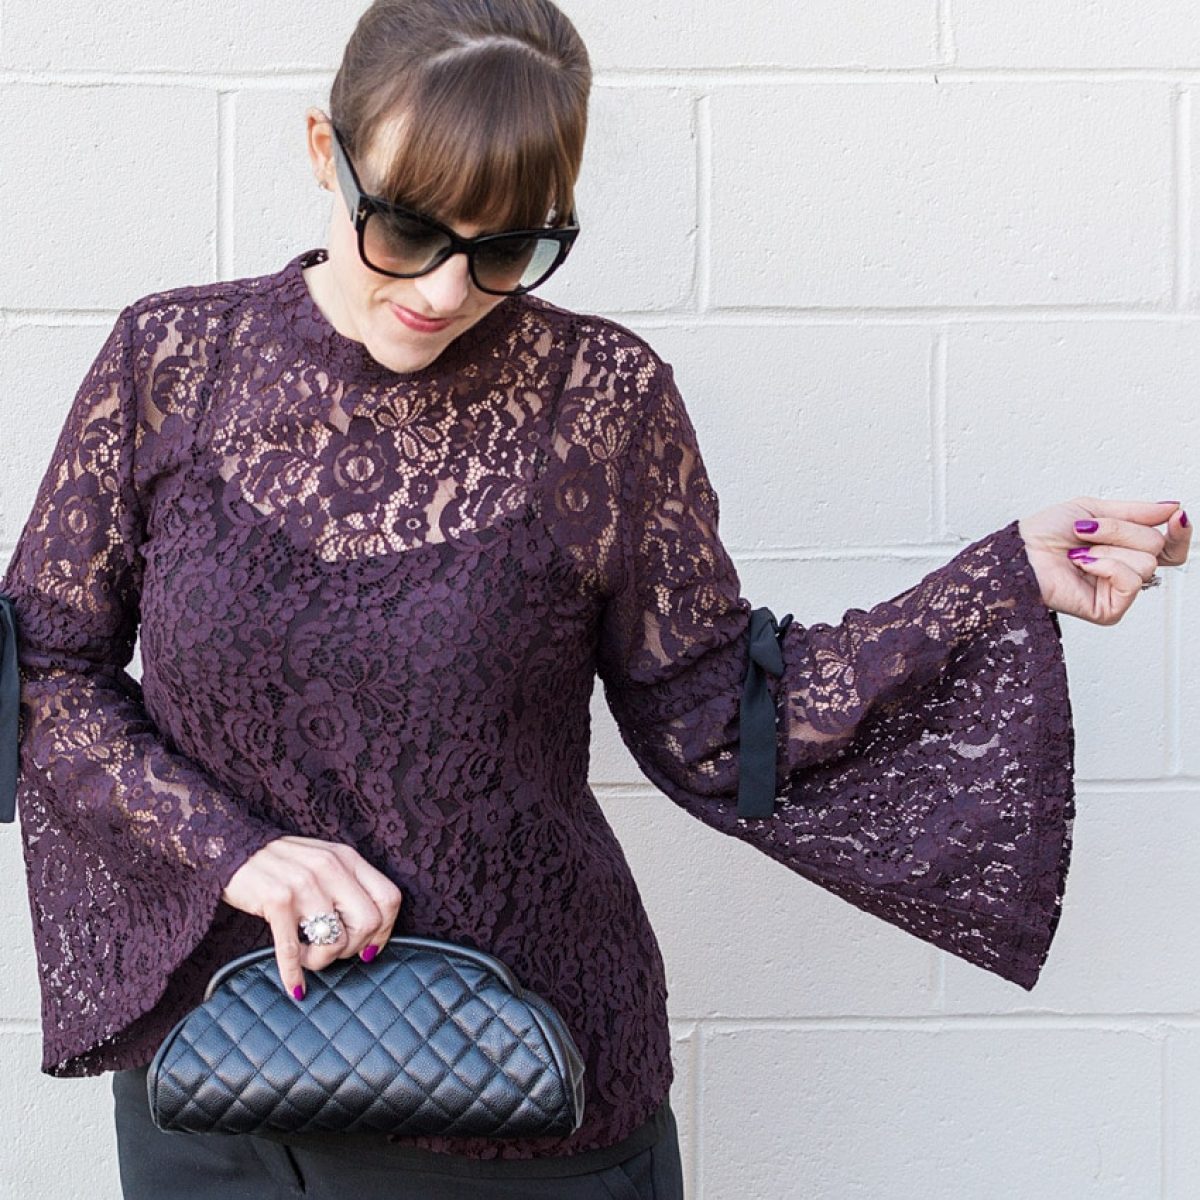 What You Need To Know About the Lace Bell Sleeve Top Trend - Posh